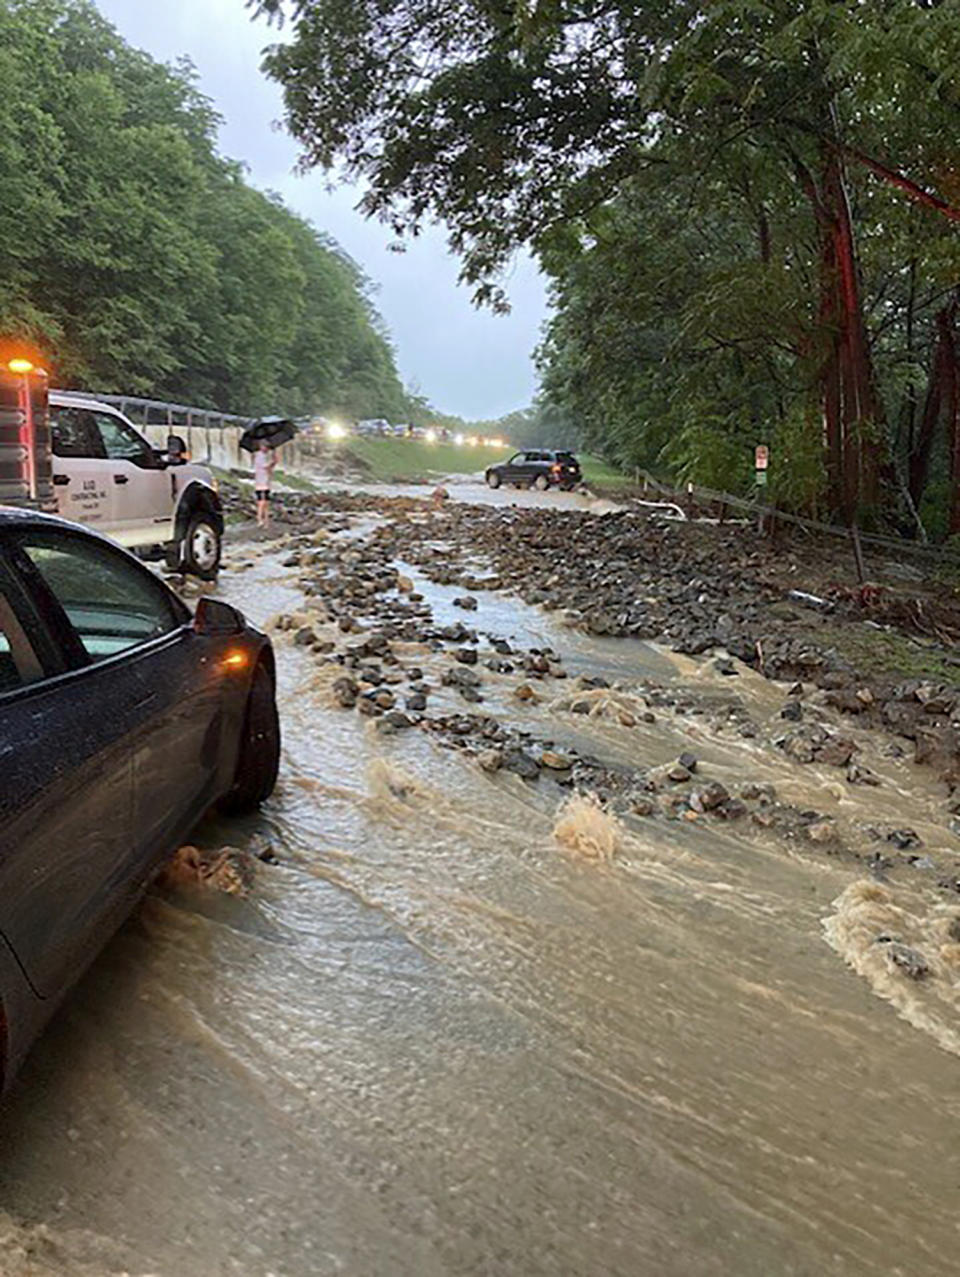 Vehicles come to a standstill near a washed-out and flooded portion of the Palisades Parkway just beyond the traffic circle off the Bear Mountain Bridge, Sunday, July 9, 2023, in Orange County, N.Y. Heavy rain spawned extreme flooding in New York’s Hudson Valley that killed at least one person, swamped roadways and forced road closures on Sunday night, as much of the rest of the Northeast U.S. geared up for a major storm. (AP Photo/David Bauder)